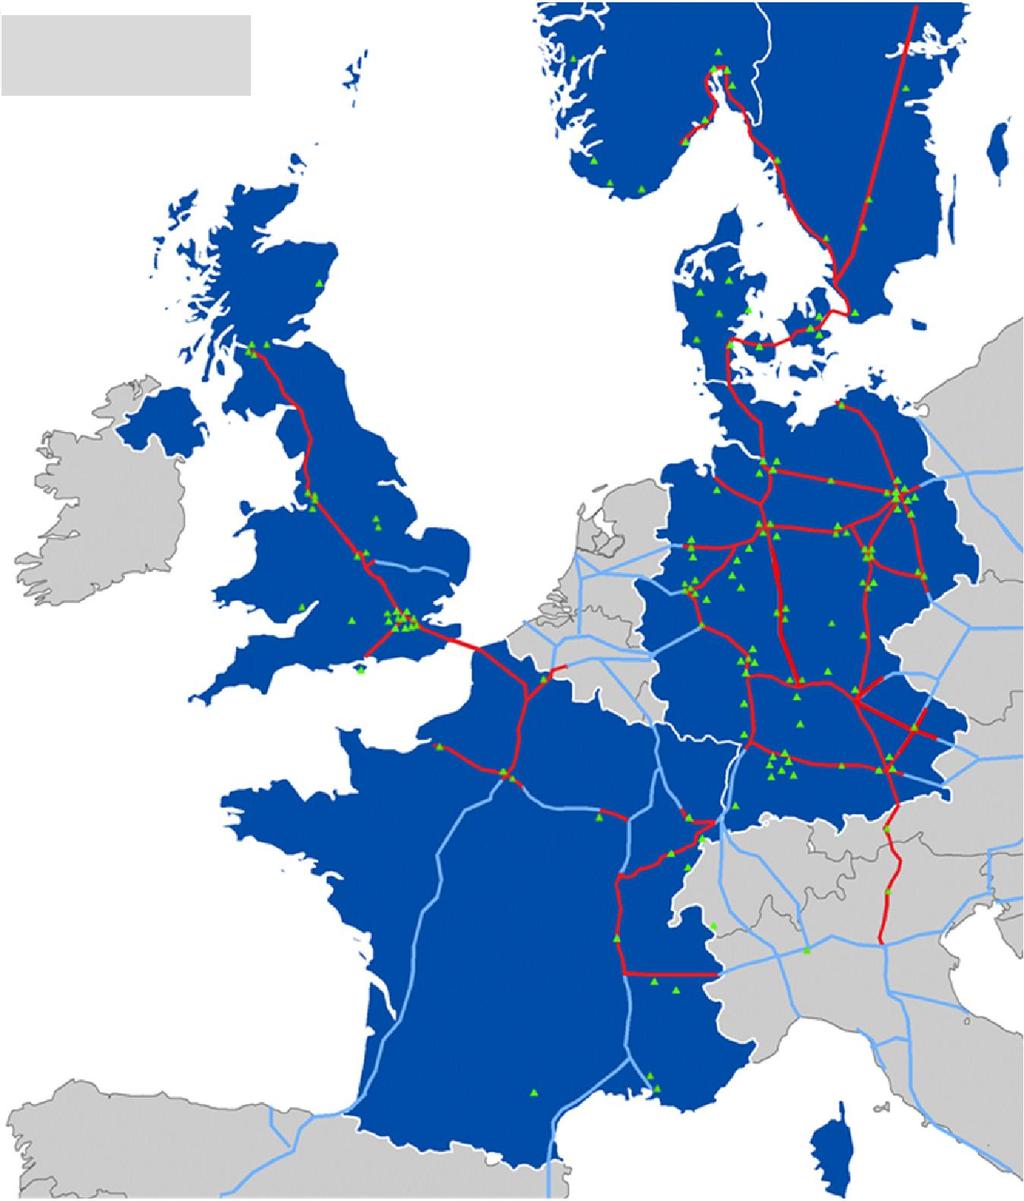 By 2018 a pan-european project can increase the refuelling network across these nations and start to create strategic links along TEN-T corridors Likely expansion of the network by 2018 (>80 kg/day